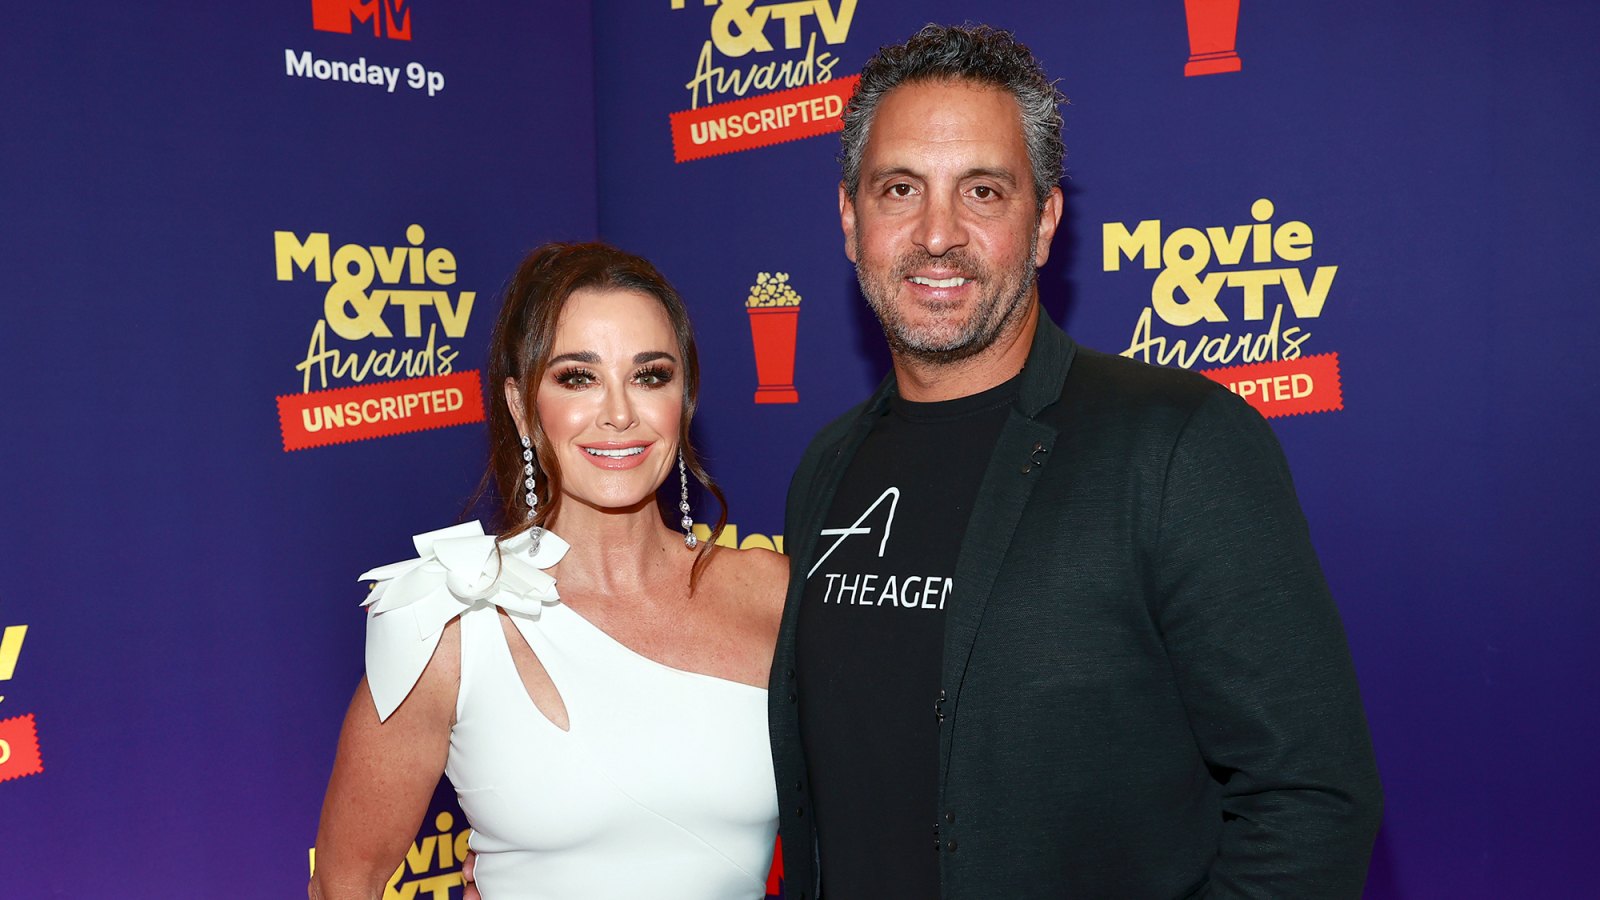 Mauricio Umansky Confirms He and Kyle Richards Are 'Not Separated' and 'Not Divorced'